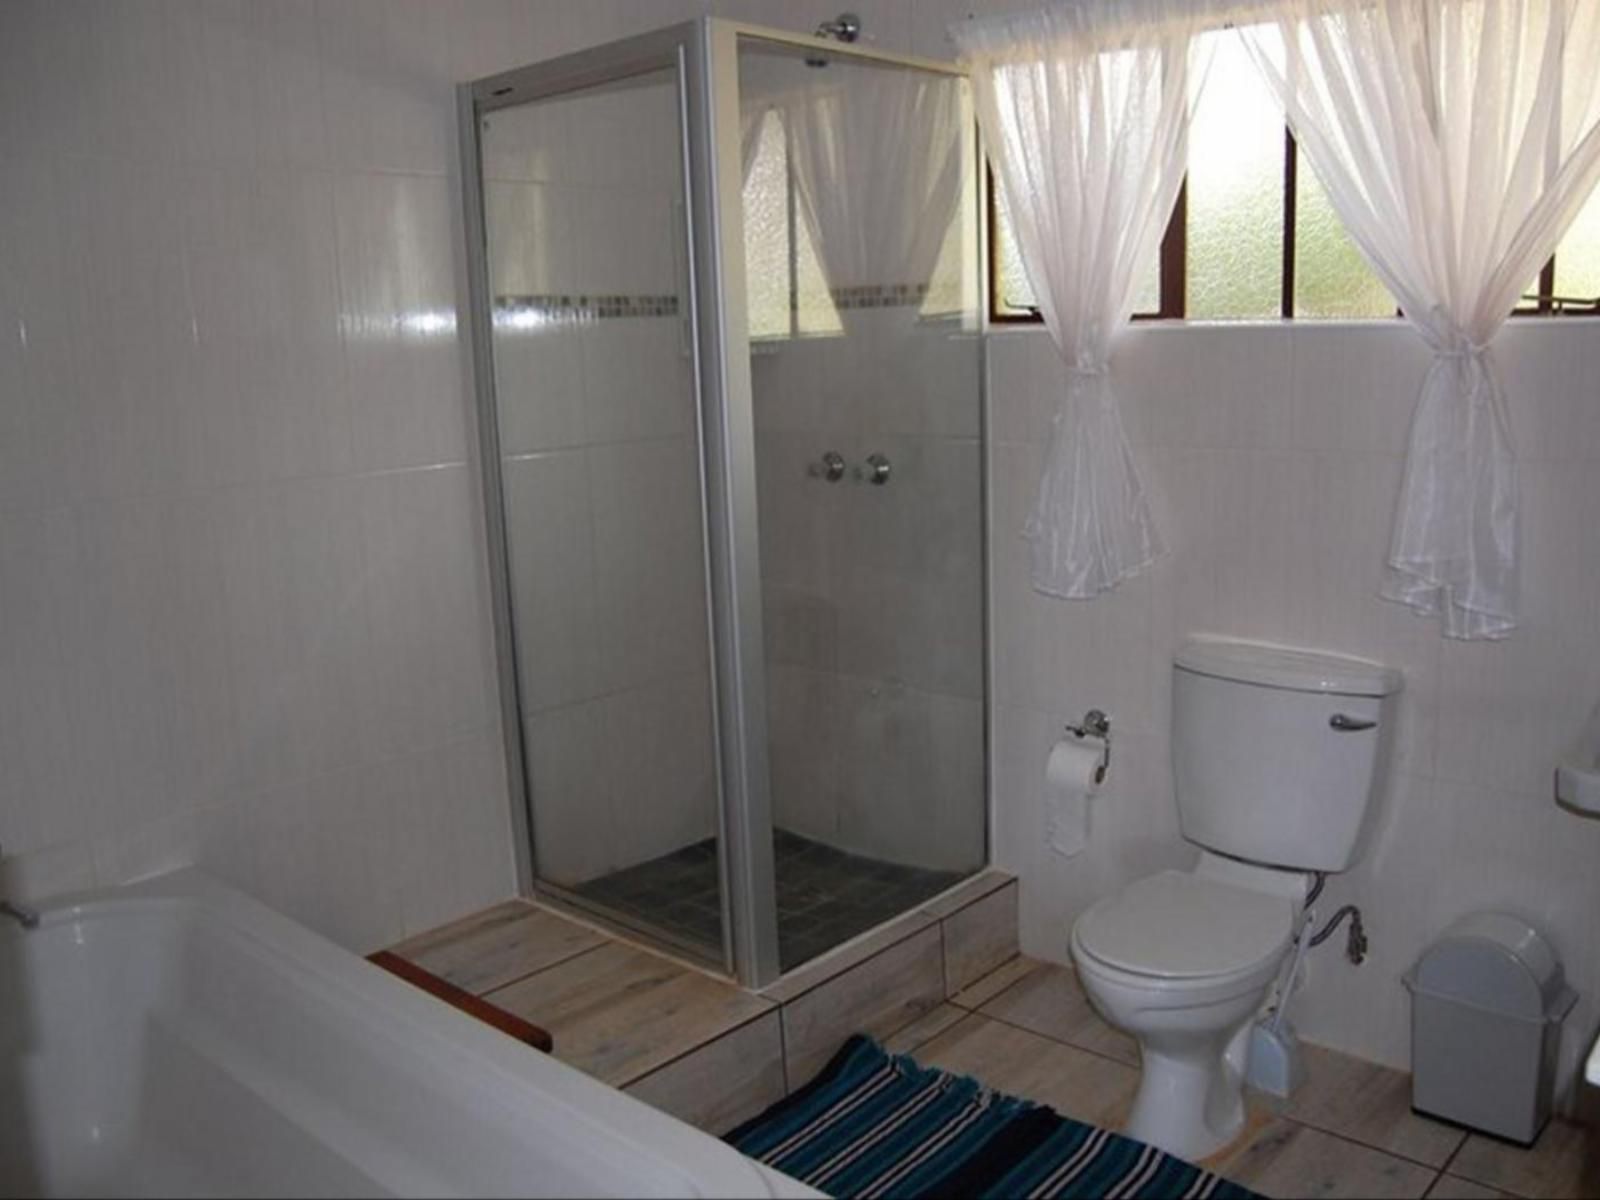 Gallery Inn Bela Bela Warmbaths Limpopo Province South Africa Unsaturated, Bathroom